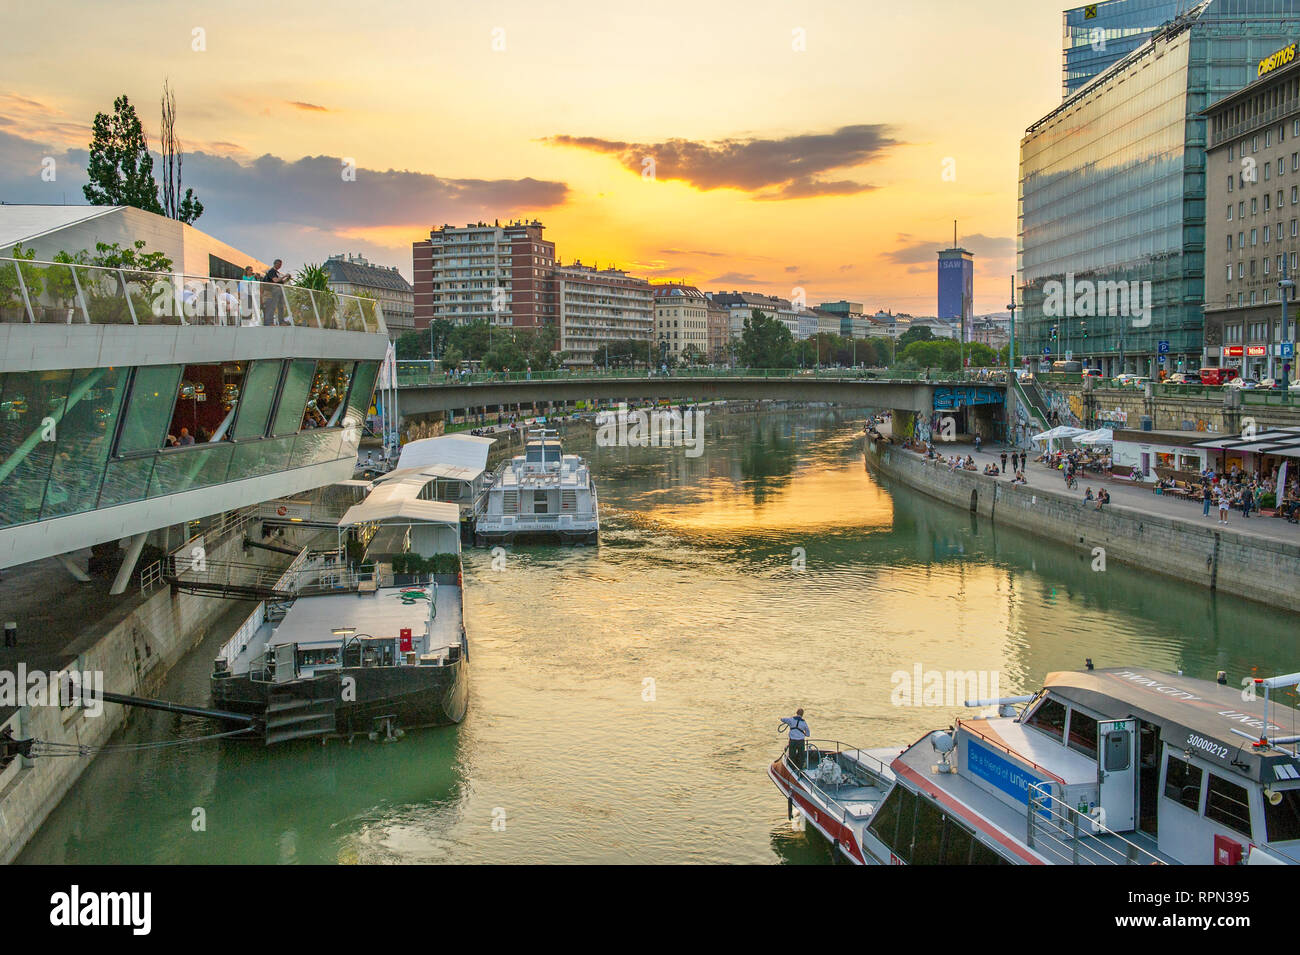 Riverboats and cafes along the Danube canal (Donaukanal) at sunset, close to Schwedenplatz, Vienna, Austria Stock Photo